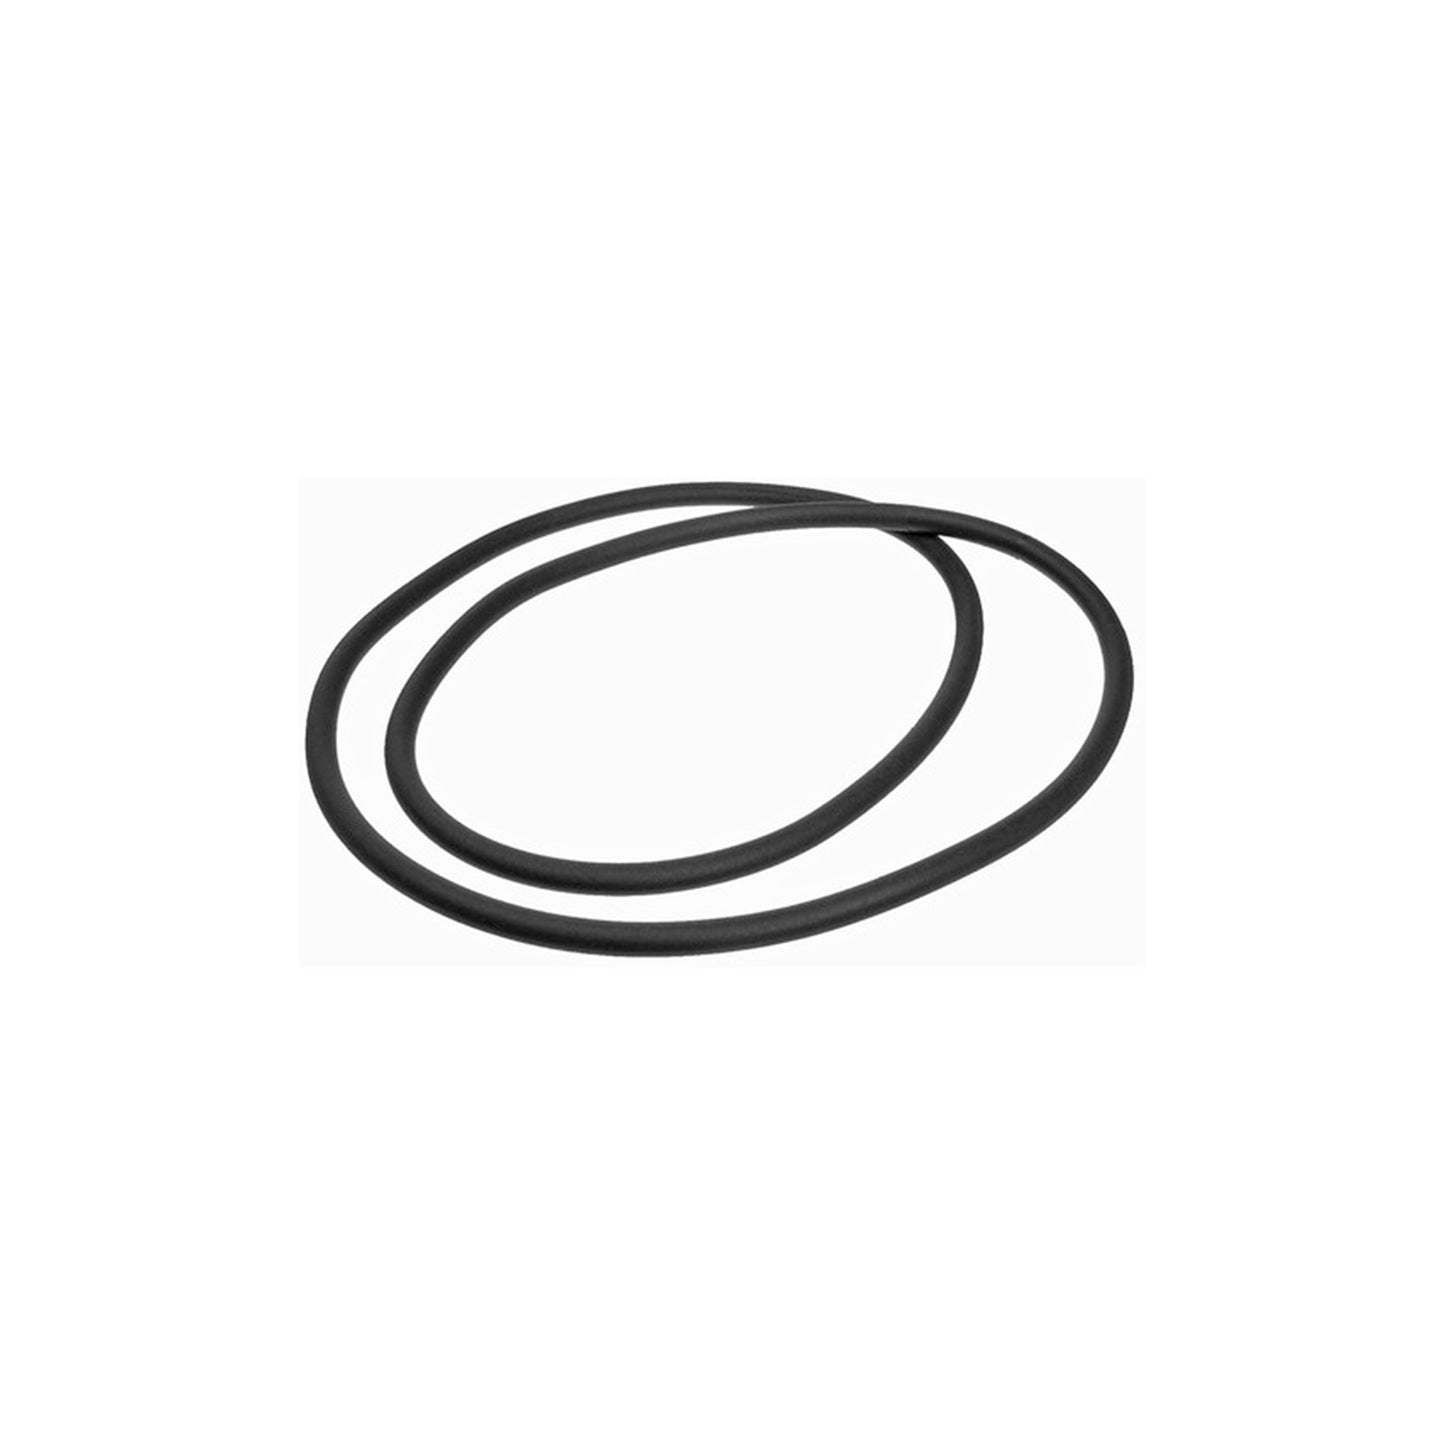 Pelican 1203-322-000 | O-Ring for Pelican 1200 or 1300 Series Cases